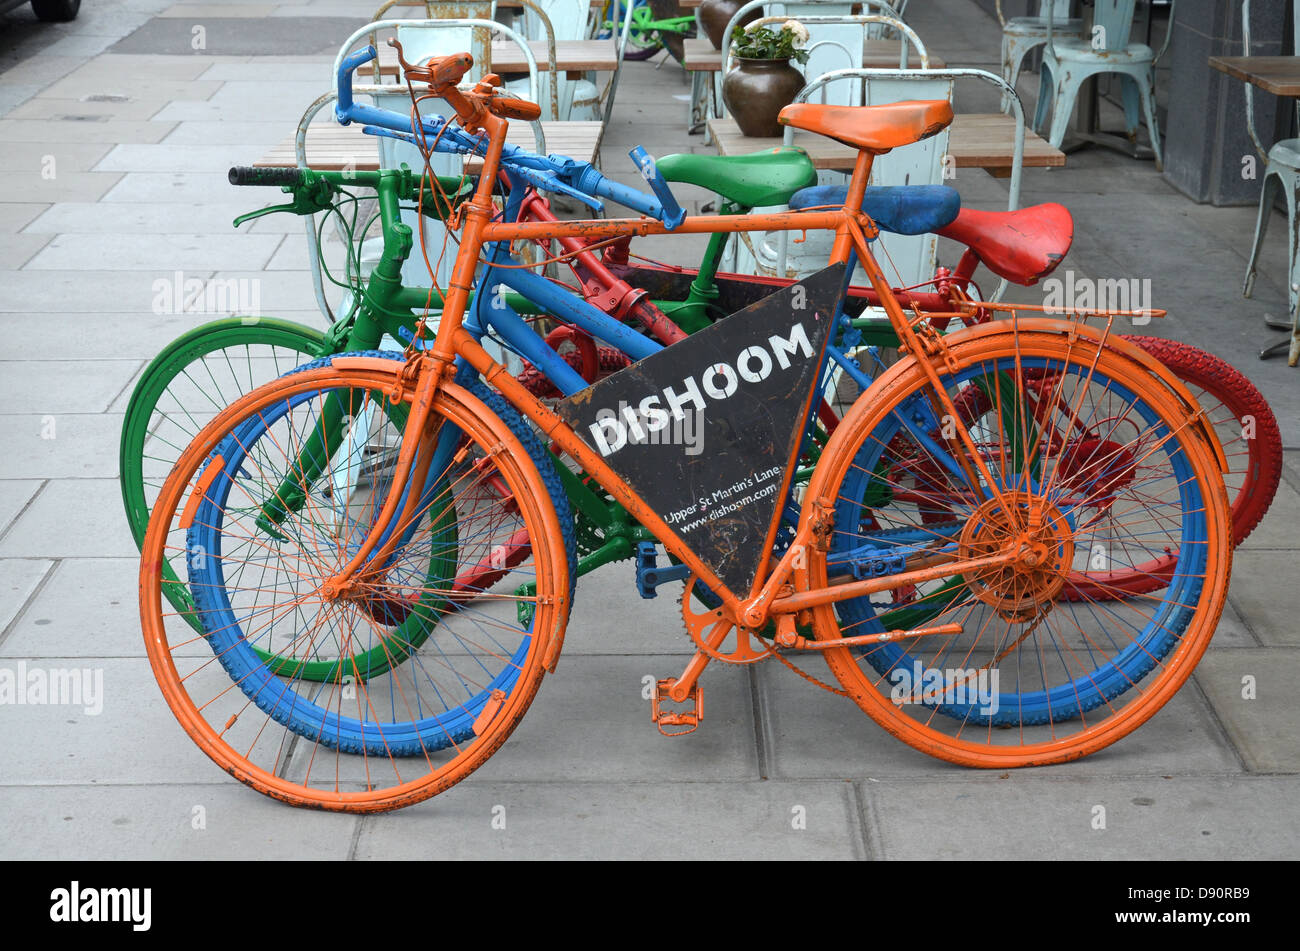 Colourful bicycles help to advertise Dishoom, a restaurant in Upper St Martin’s Lane in the Covent Garden area of London. Stock Photo